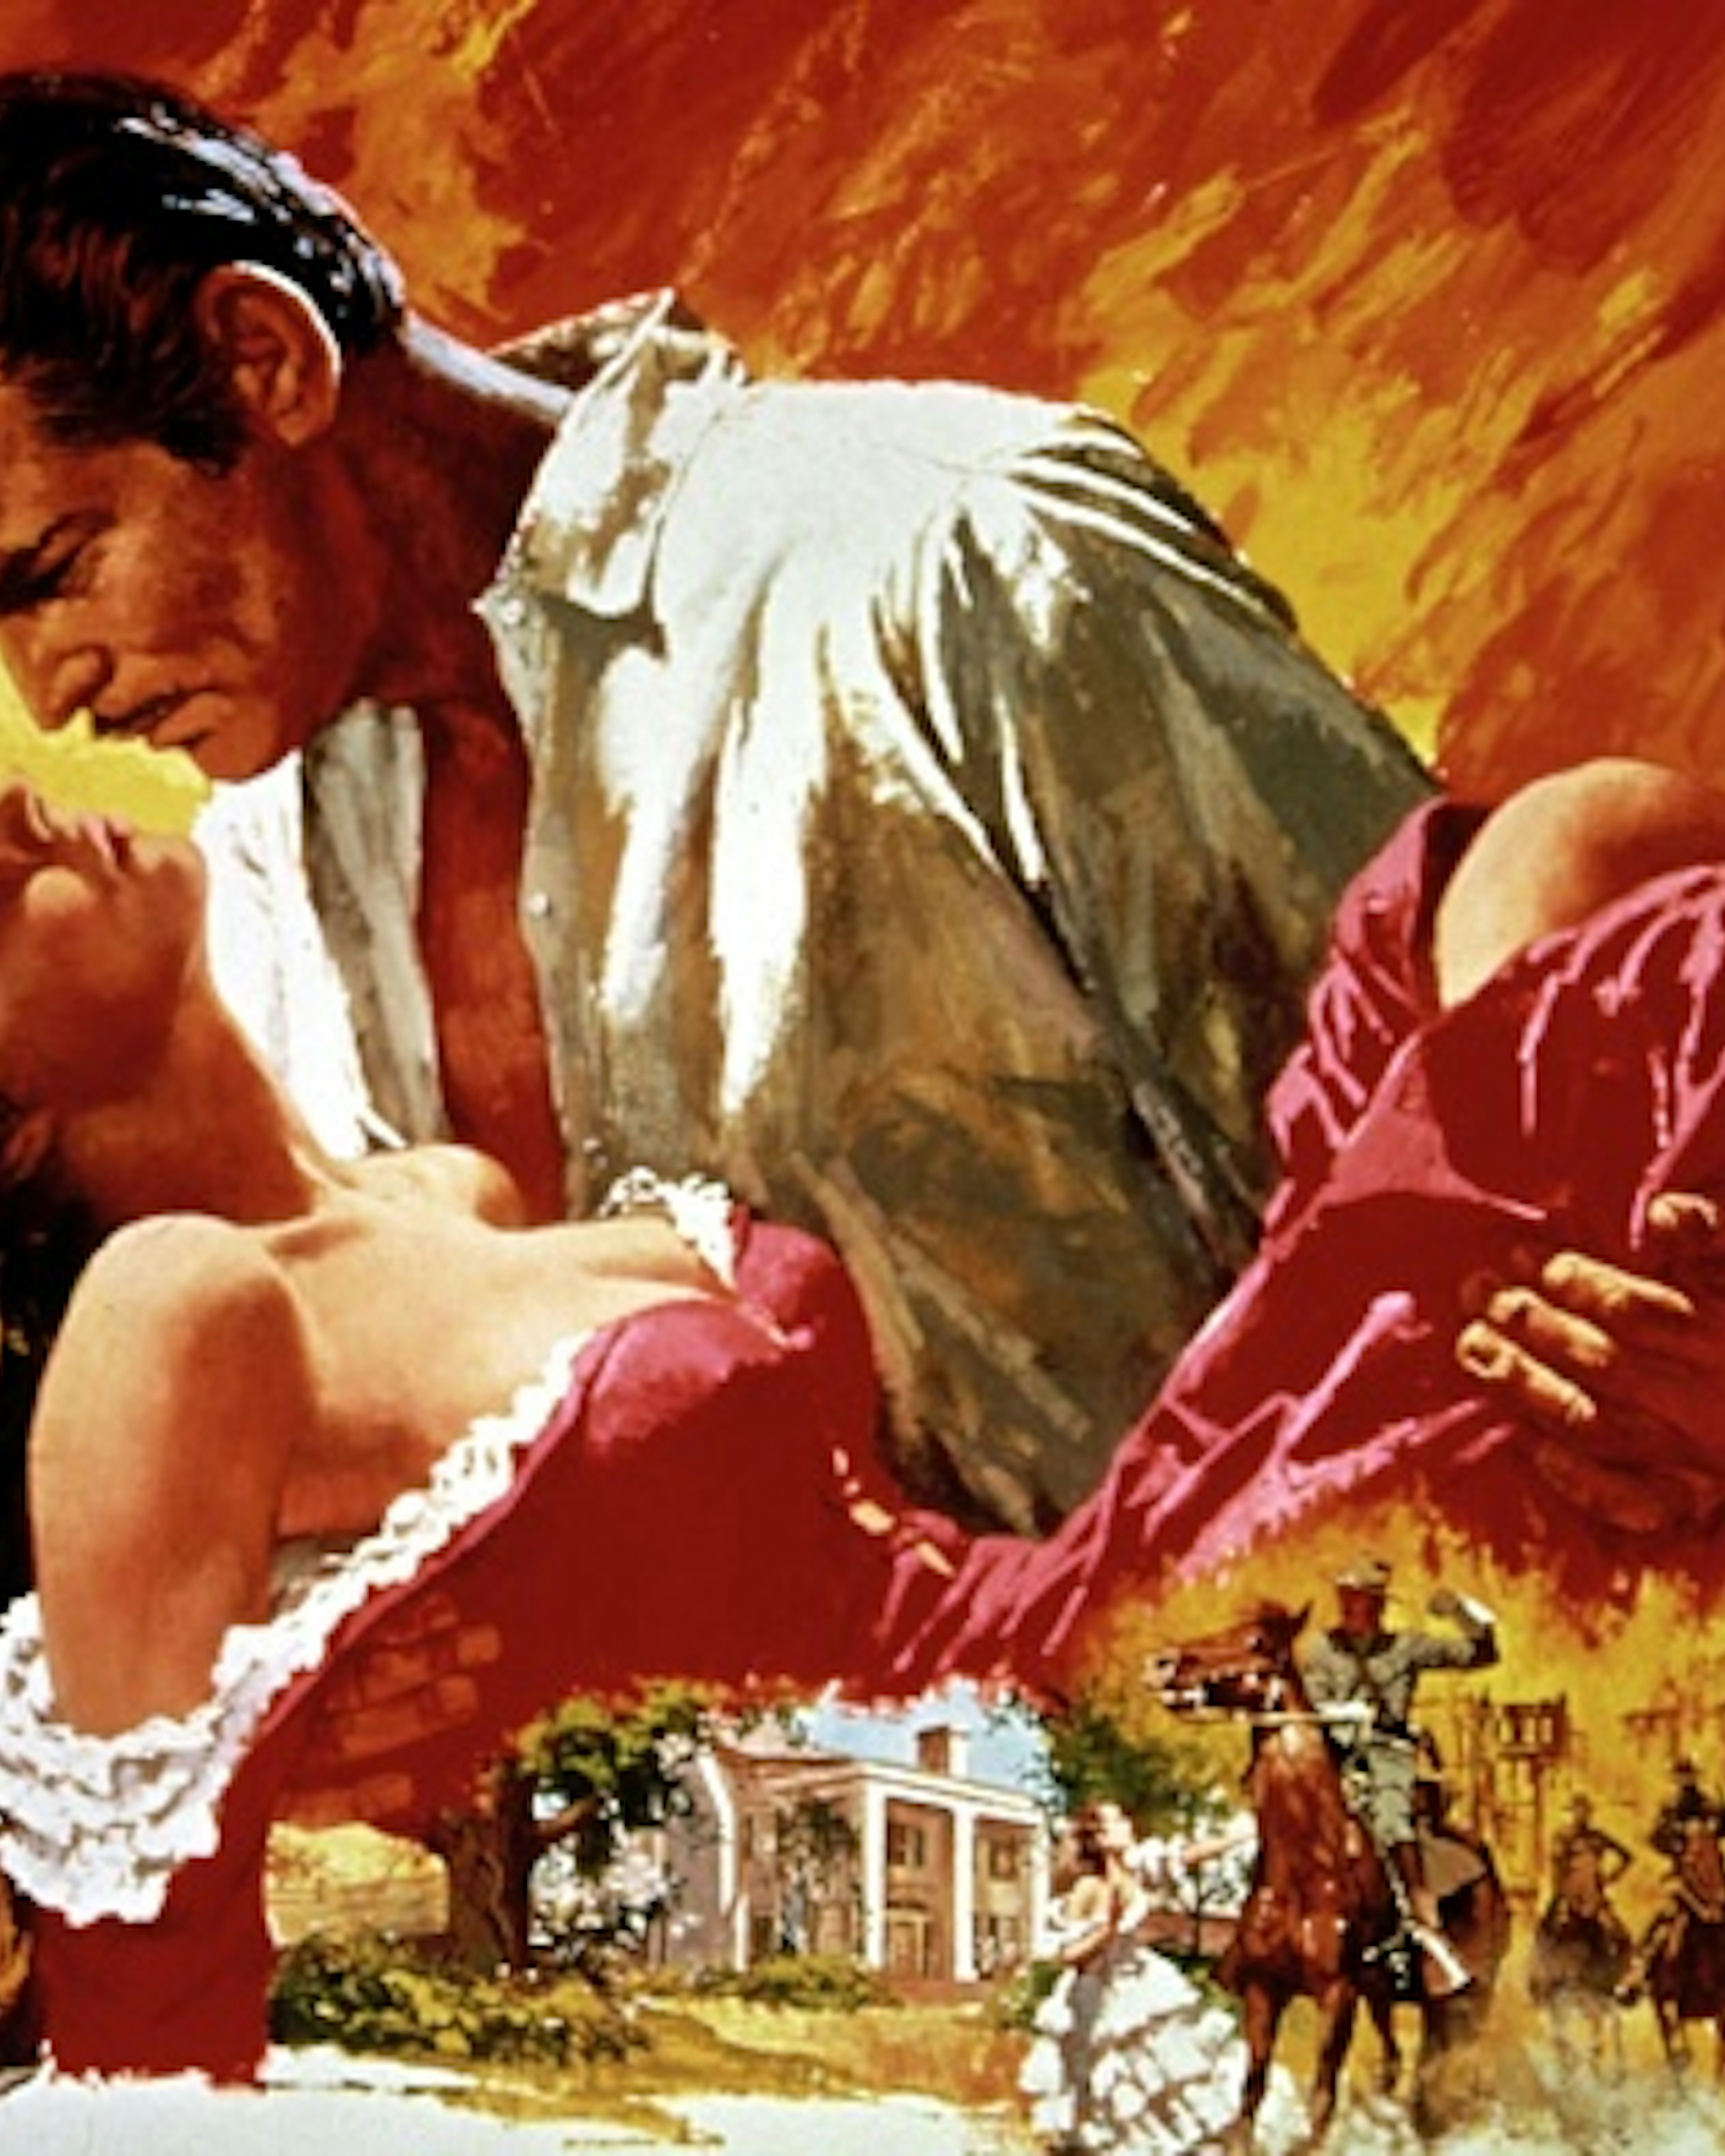 Gone With The Wind, poster, Vivien Leigh, Clark Gable, 1939.